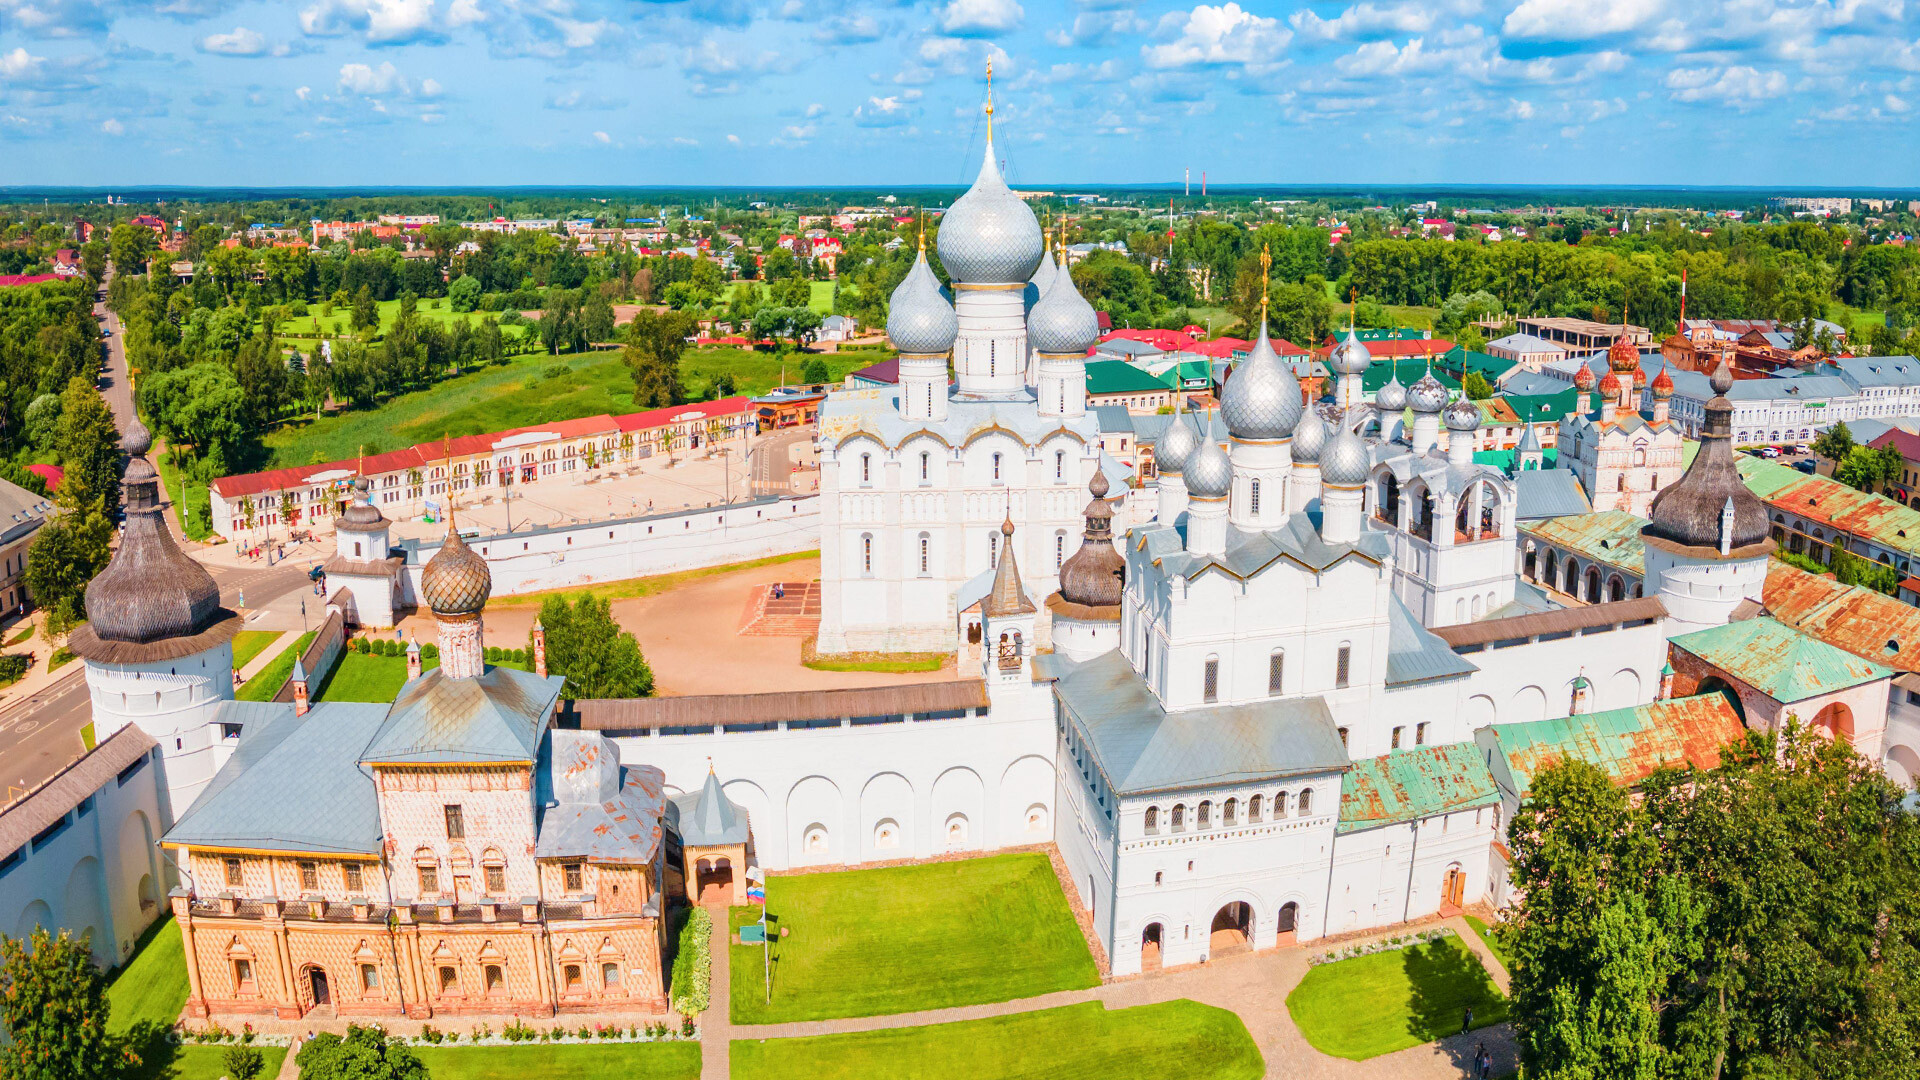 Assumption Cathedral in Rostov Veliky.